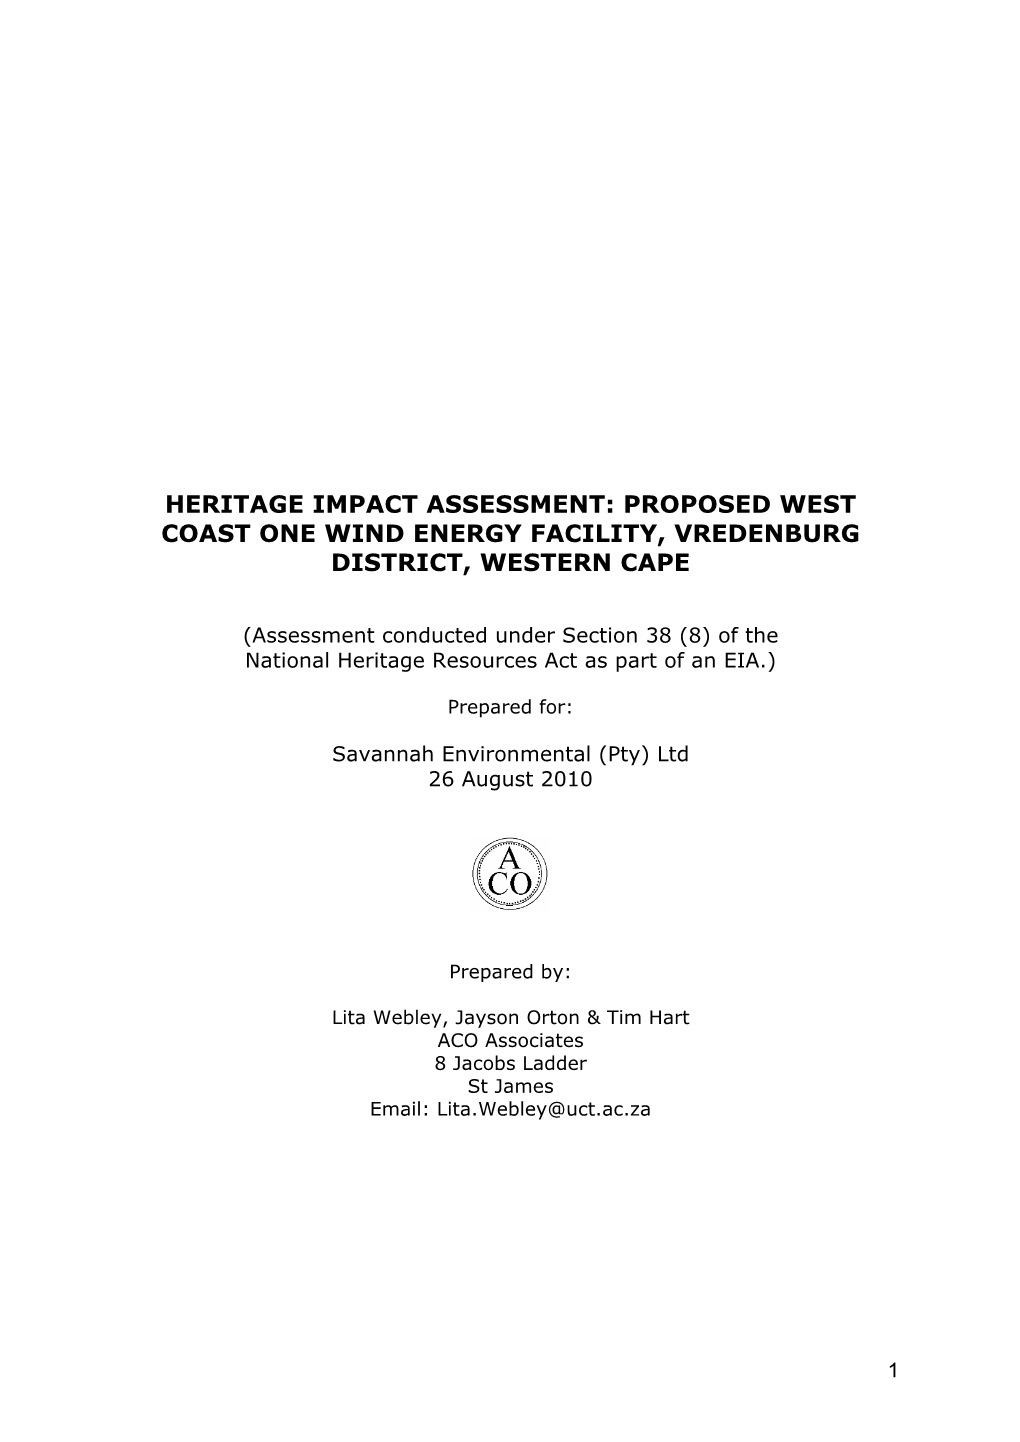 Heritage Impact Assessment: Proposed West Coast One Wind Energy Facility, Vredenburg District, Western Cape